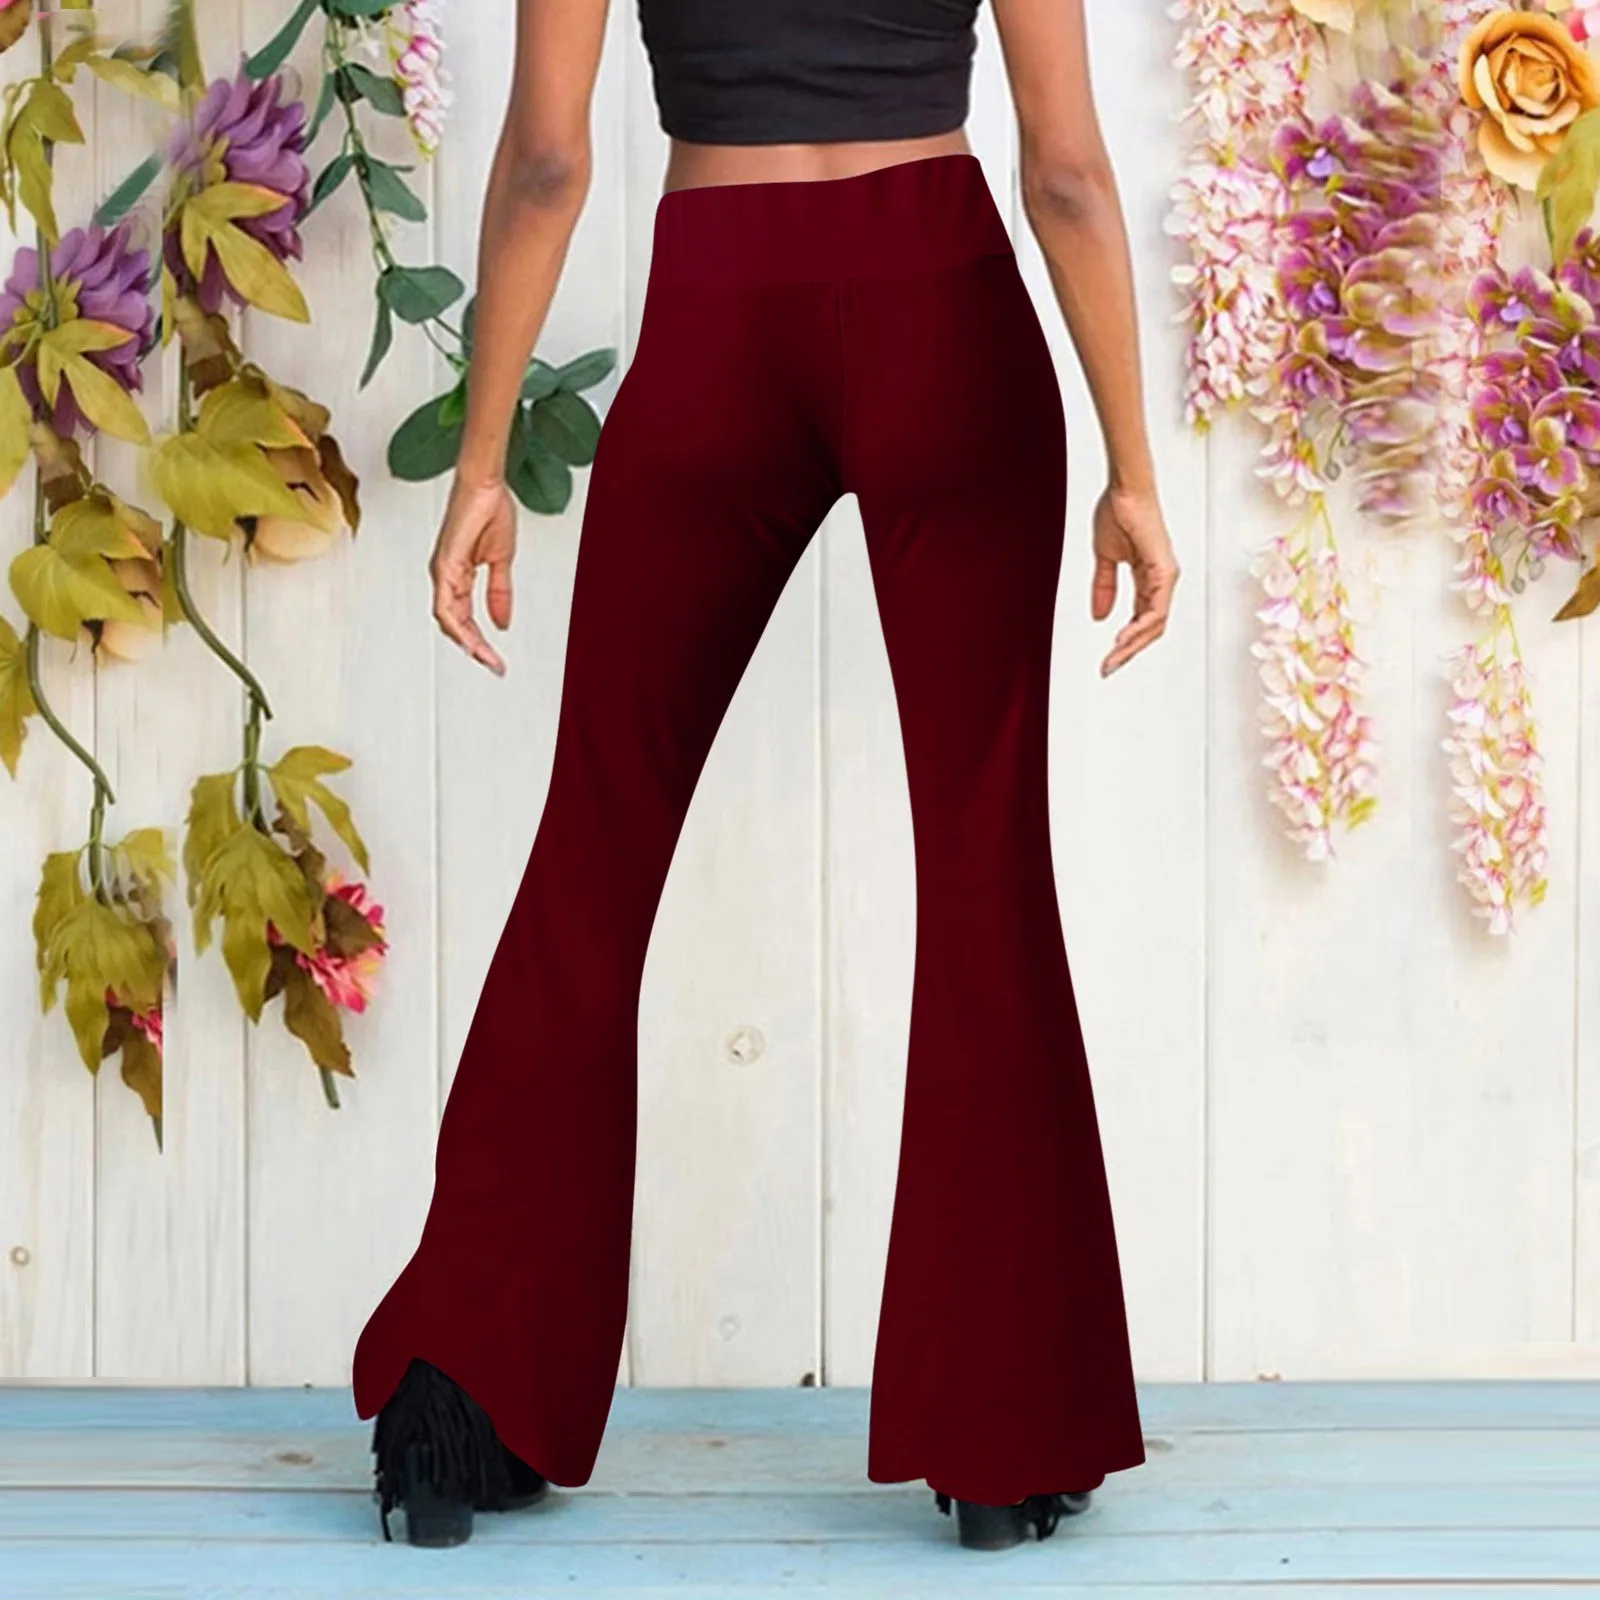 

Women Casual Pants Flare Leg High Waist Trousers Full Length Solid Color Business Casual Pants For Women Spring Summer Trouser